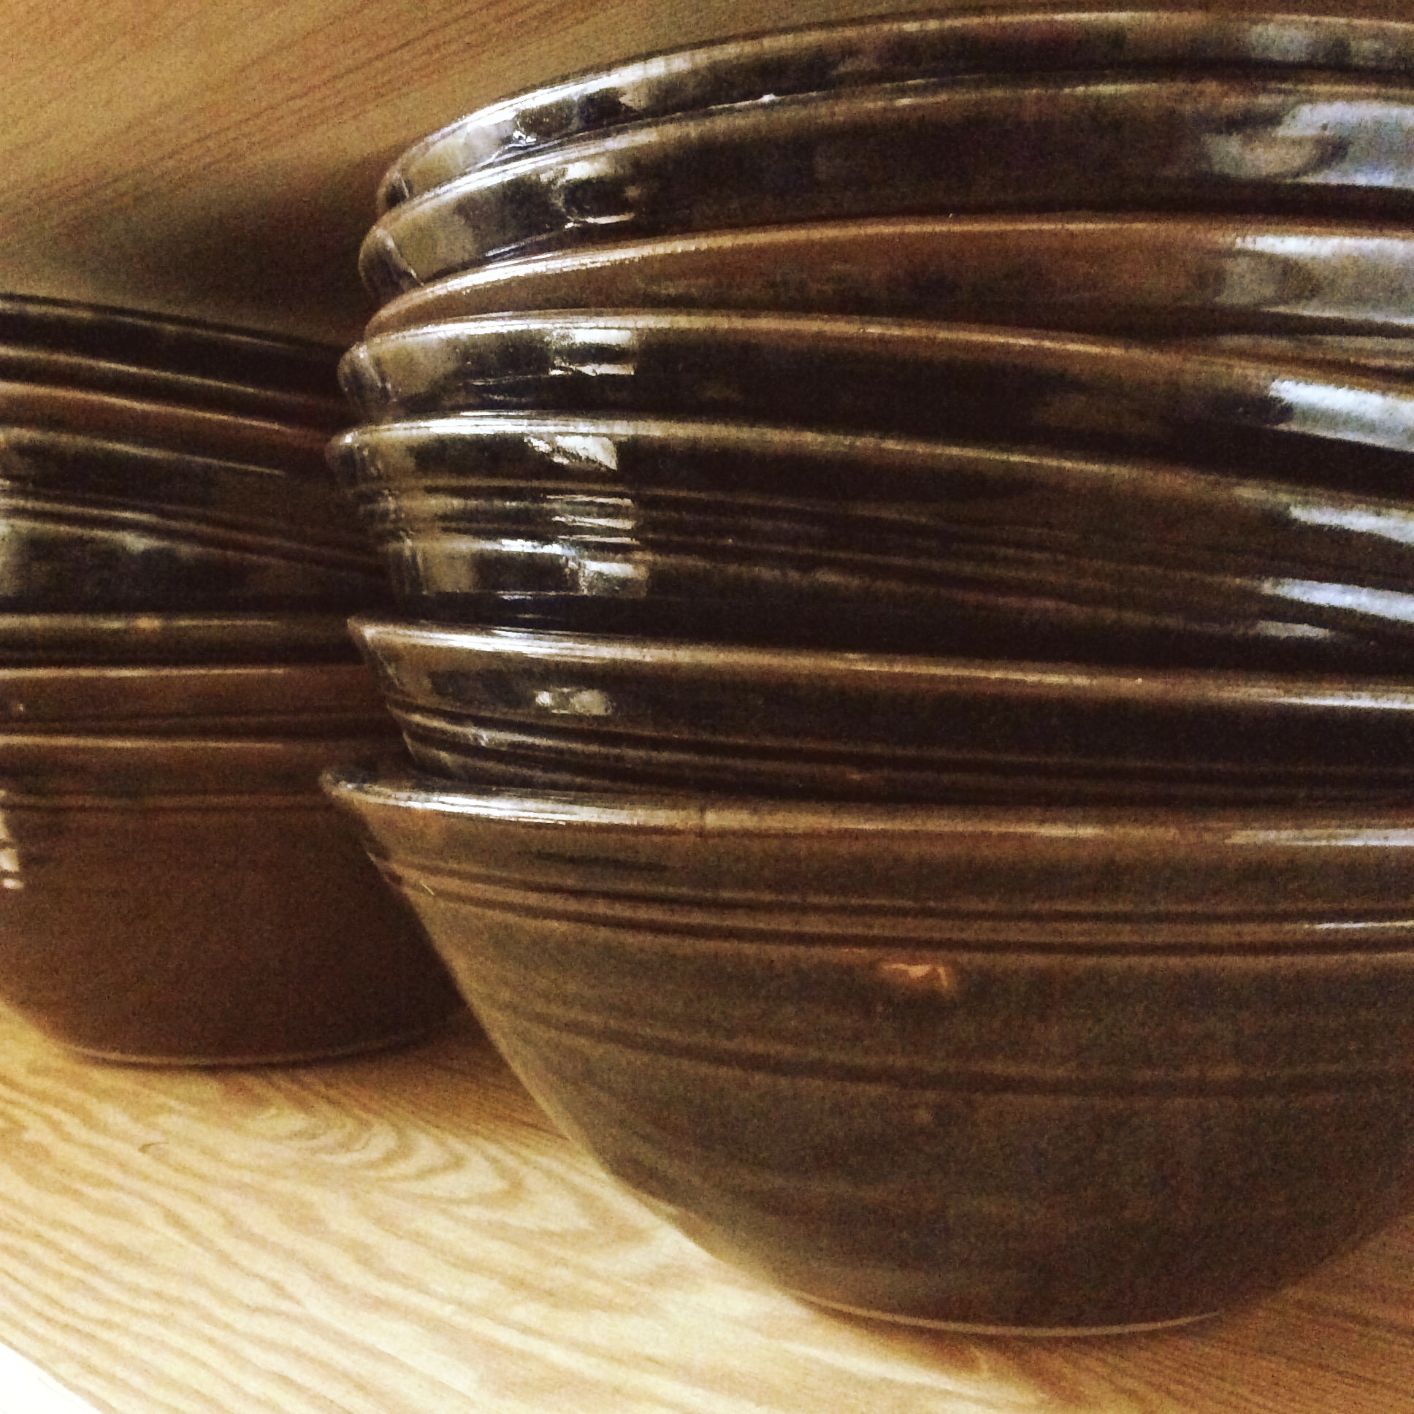 These rustic bowls make a great oversized risotto receptacle